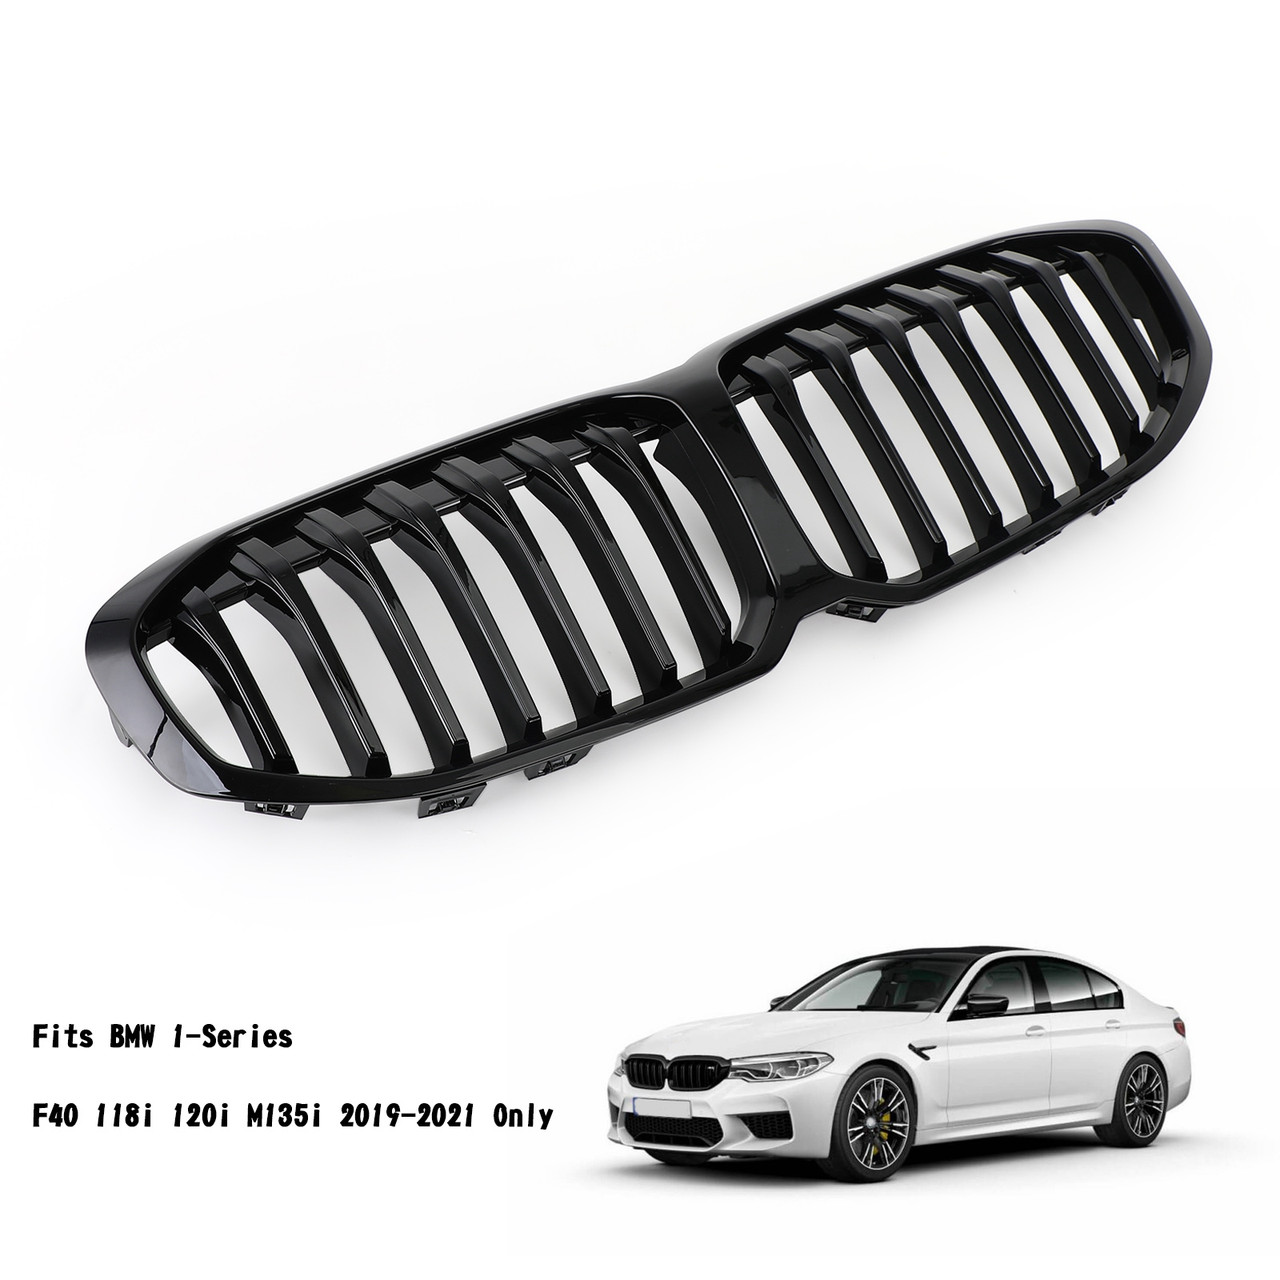 Gloss Black Front Replacement Hood Grille Fit BMW F40 1-Series 2019-2023